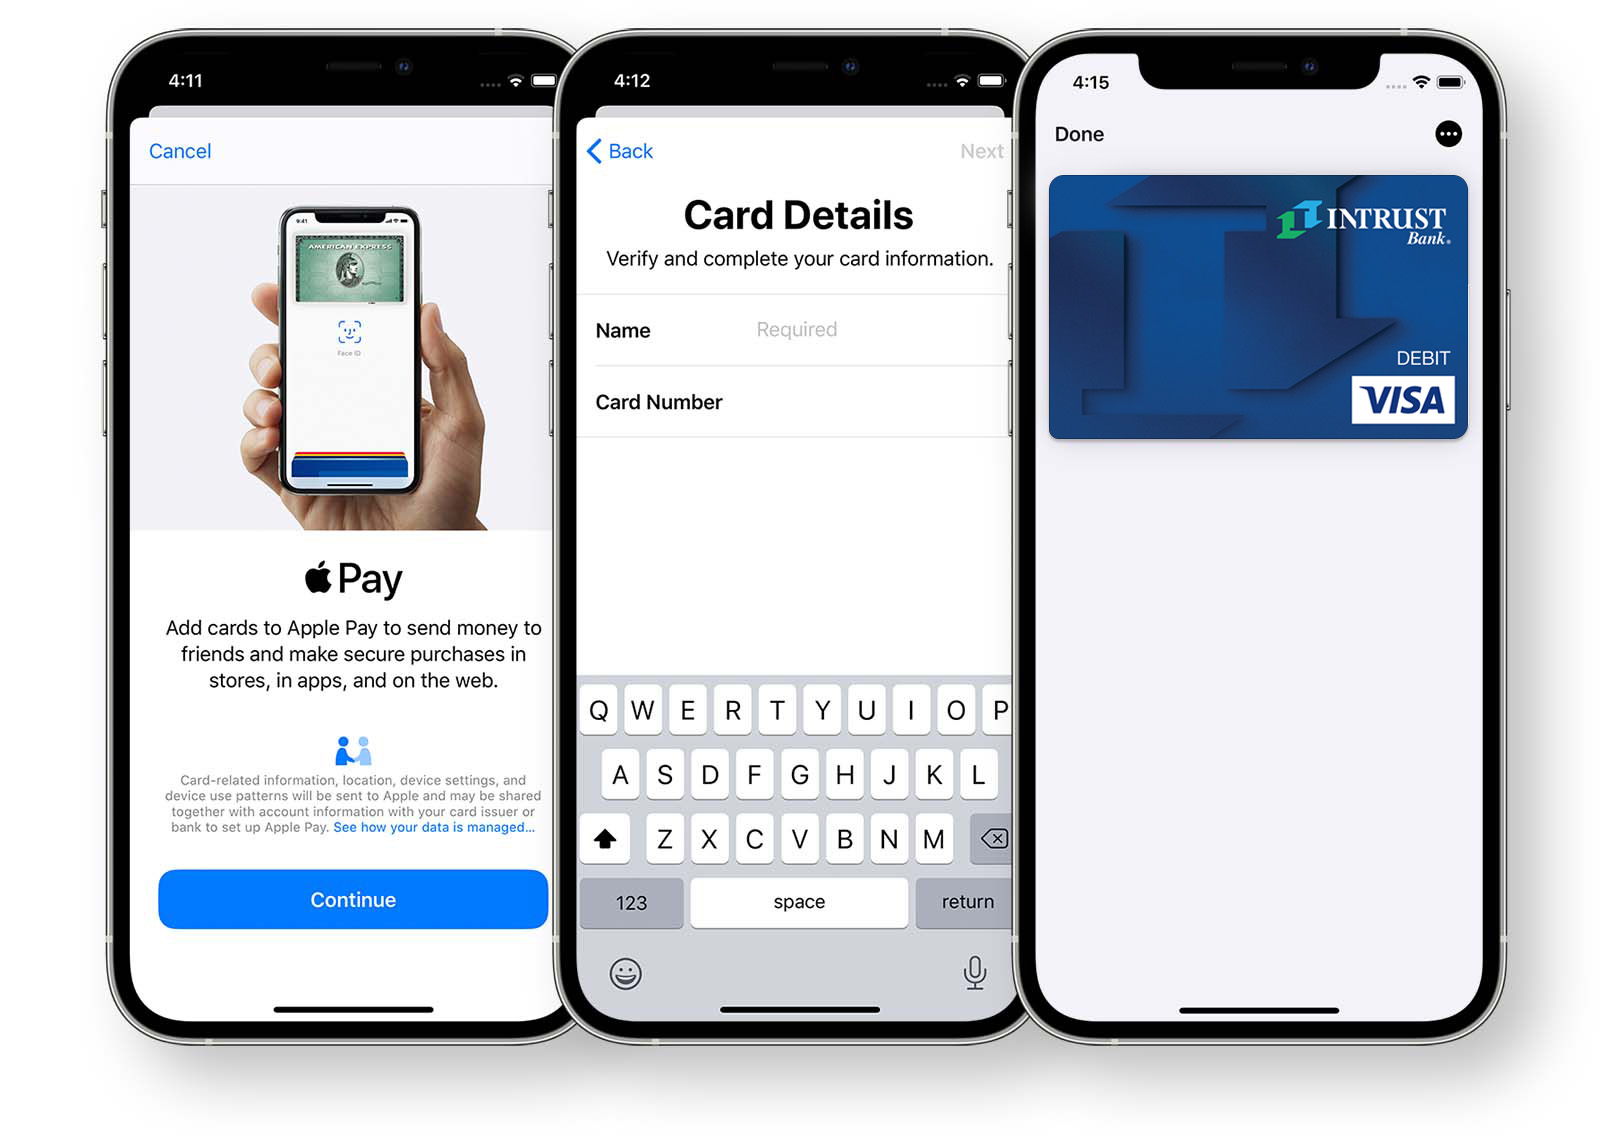 A set of three iPhones showing the steps to add an INTRUST Bank debit card to Apple Pay.